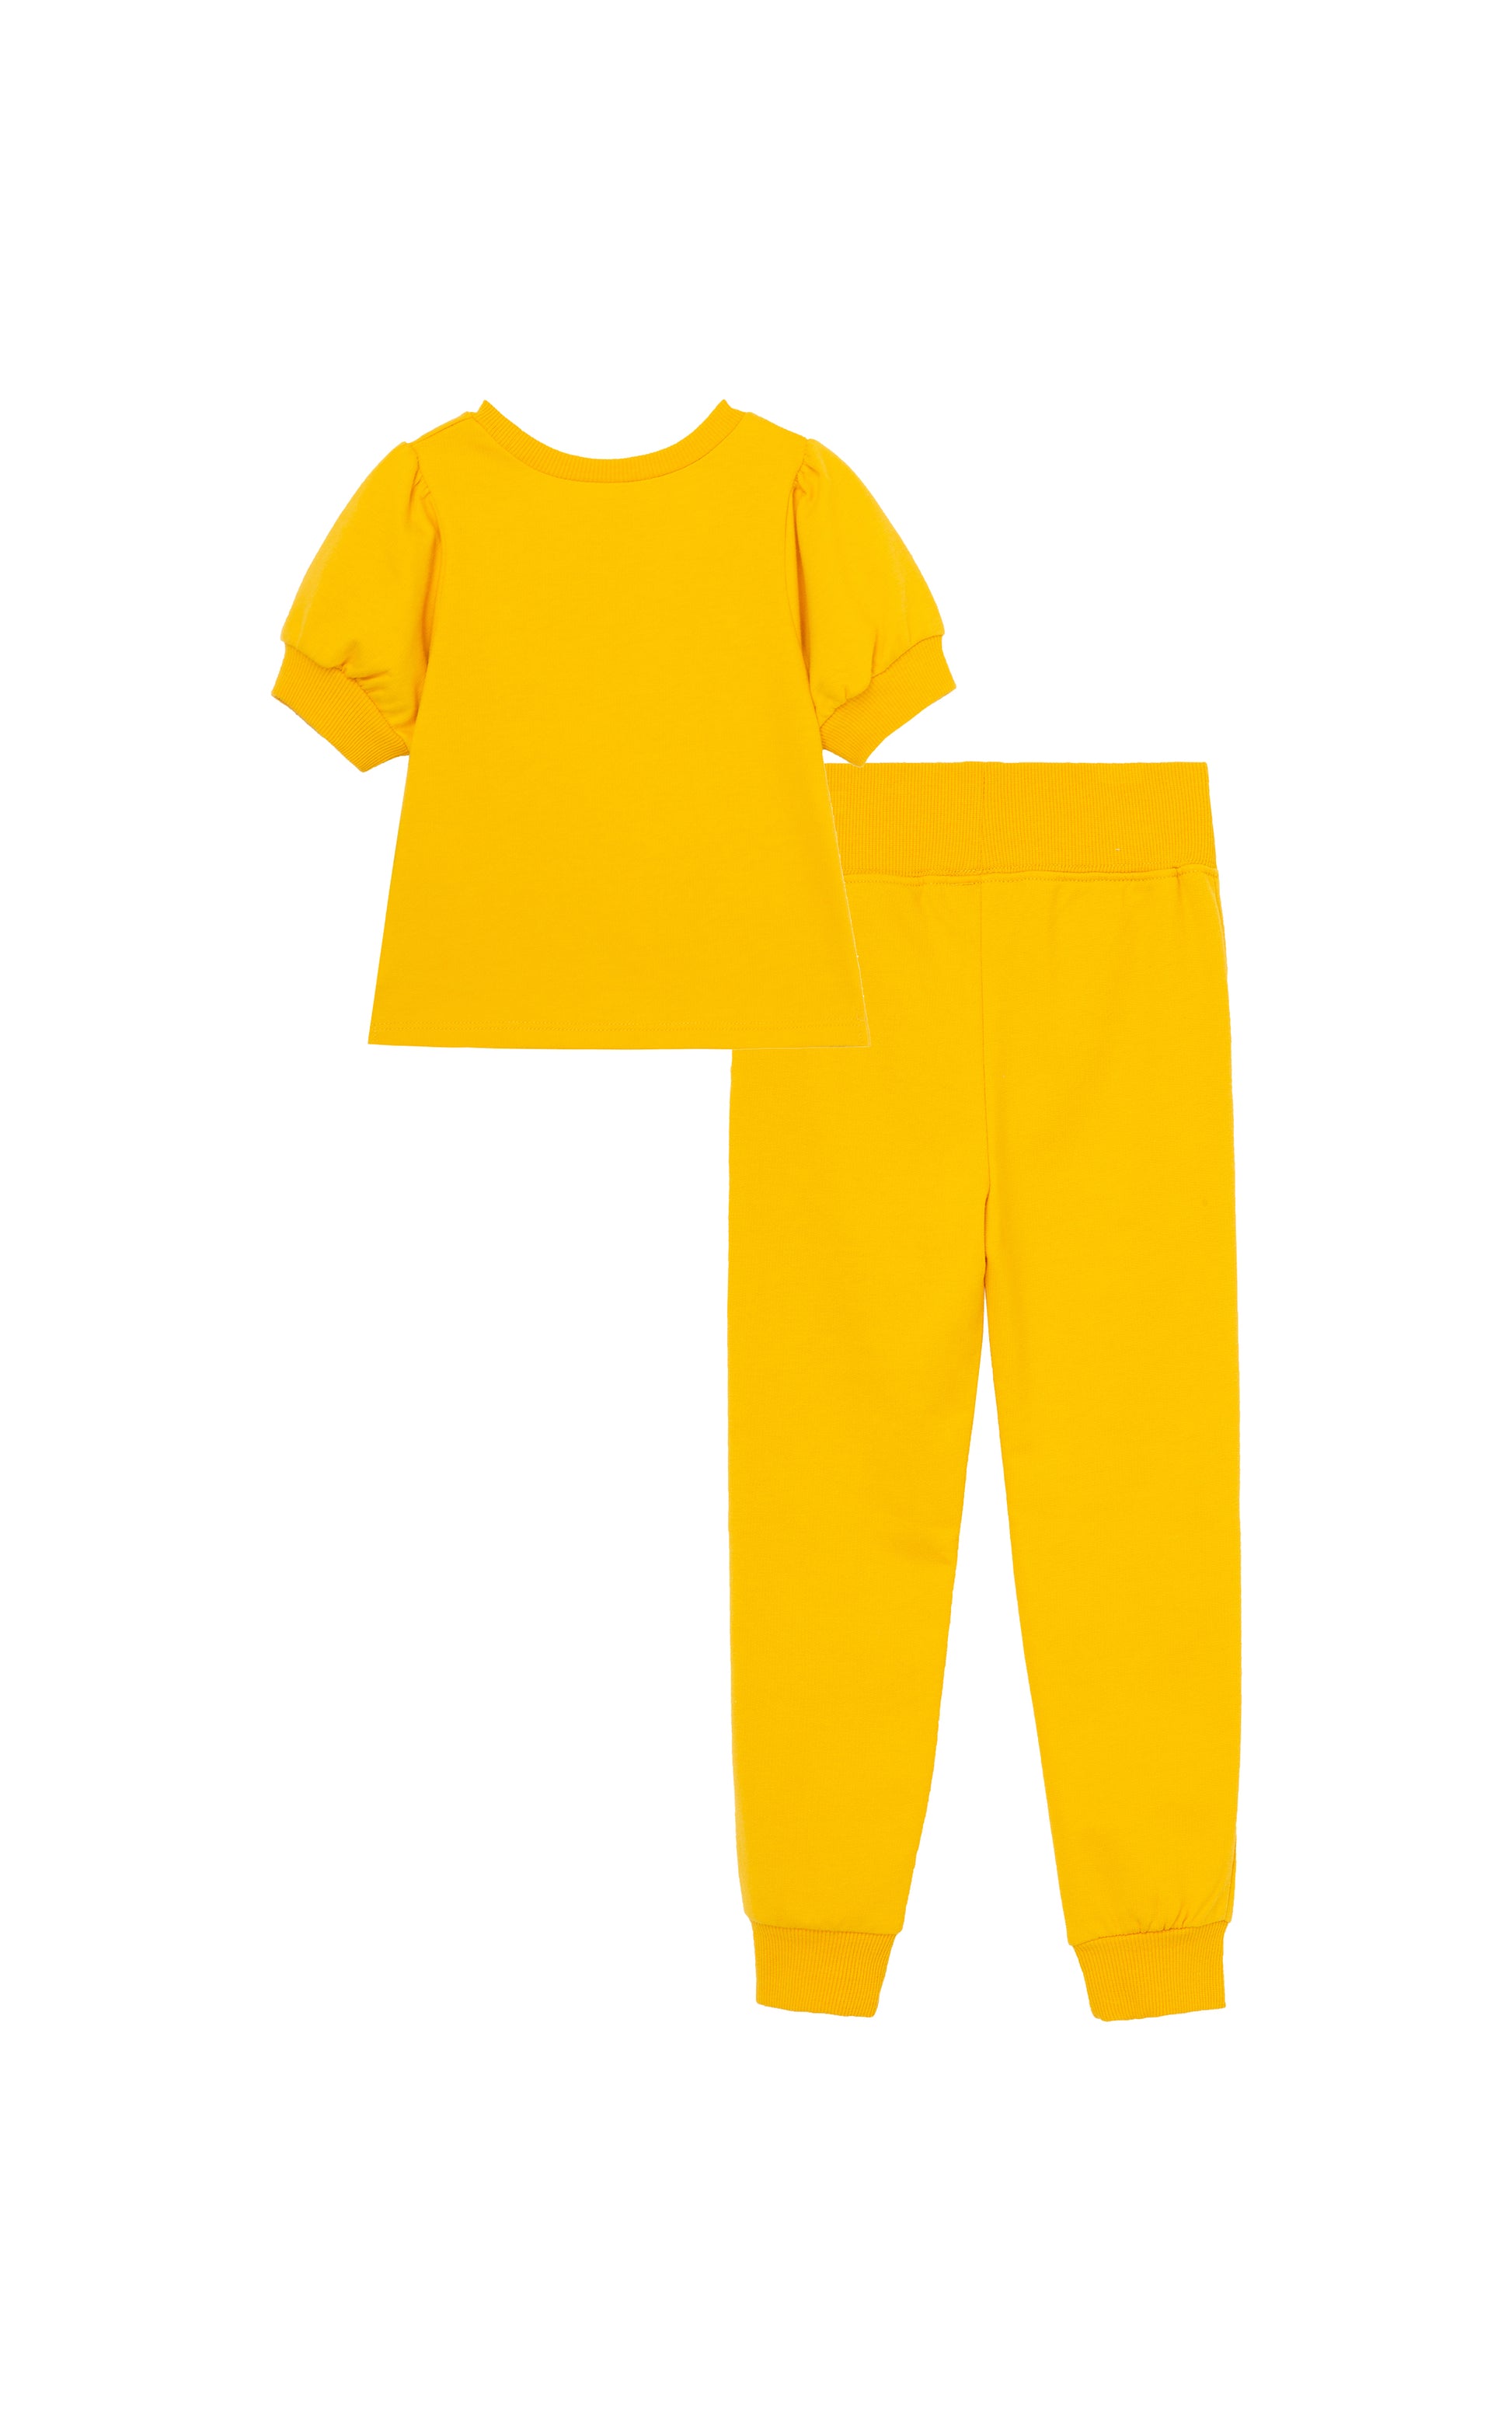 Back view of bright yellow short sleeve sweatshirt knotted at waist with matching sweatpants